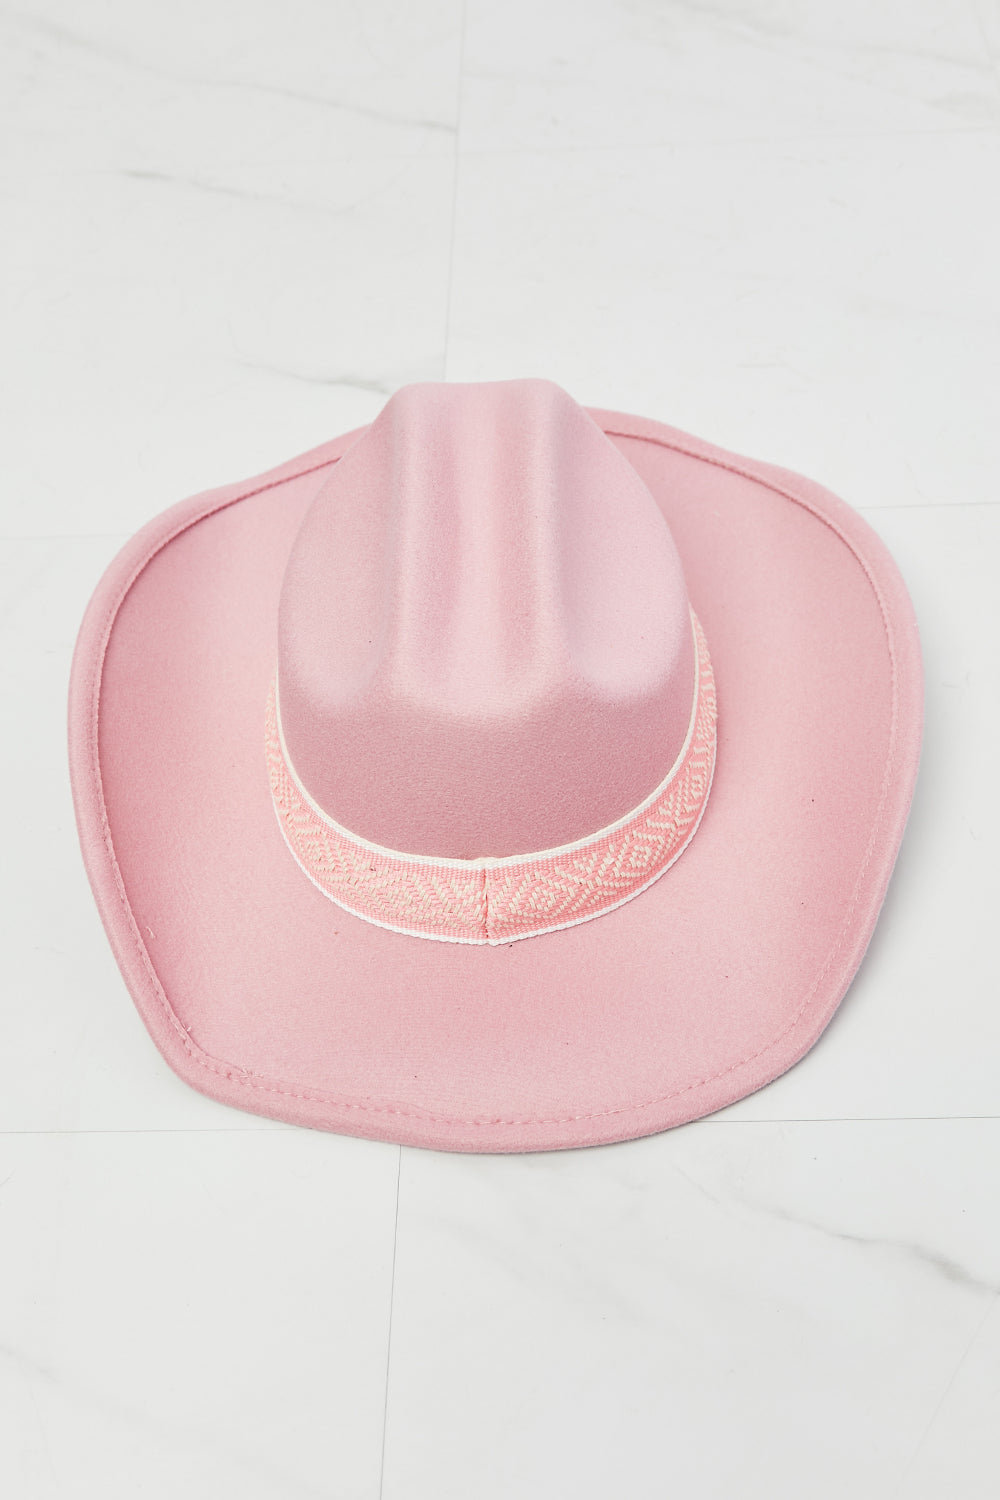 Fame Western Cutie Cowboy Hat in Pink Print on any thing USA/STOD clothes